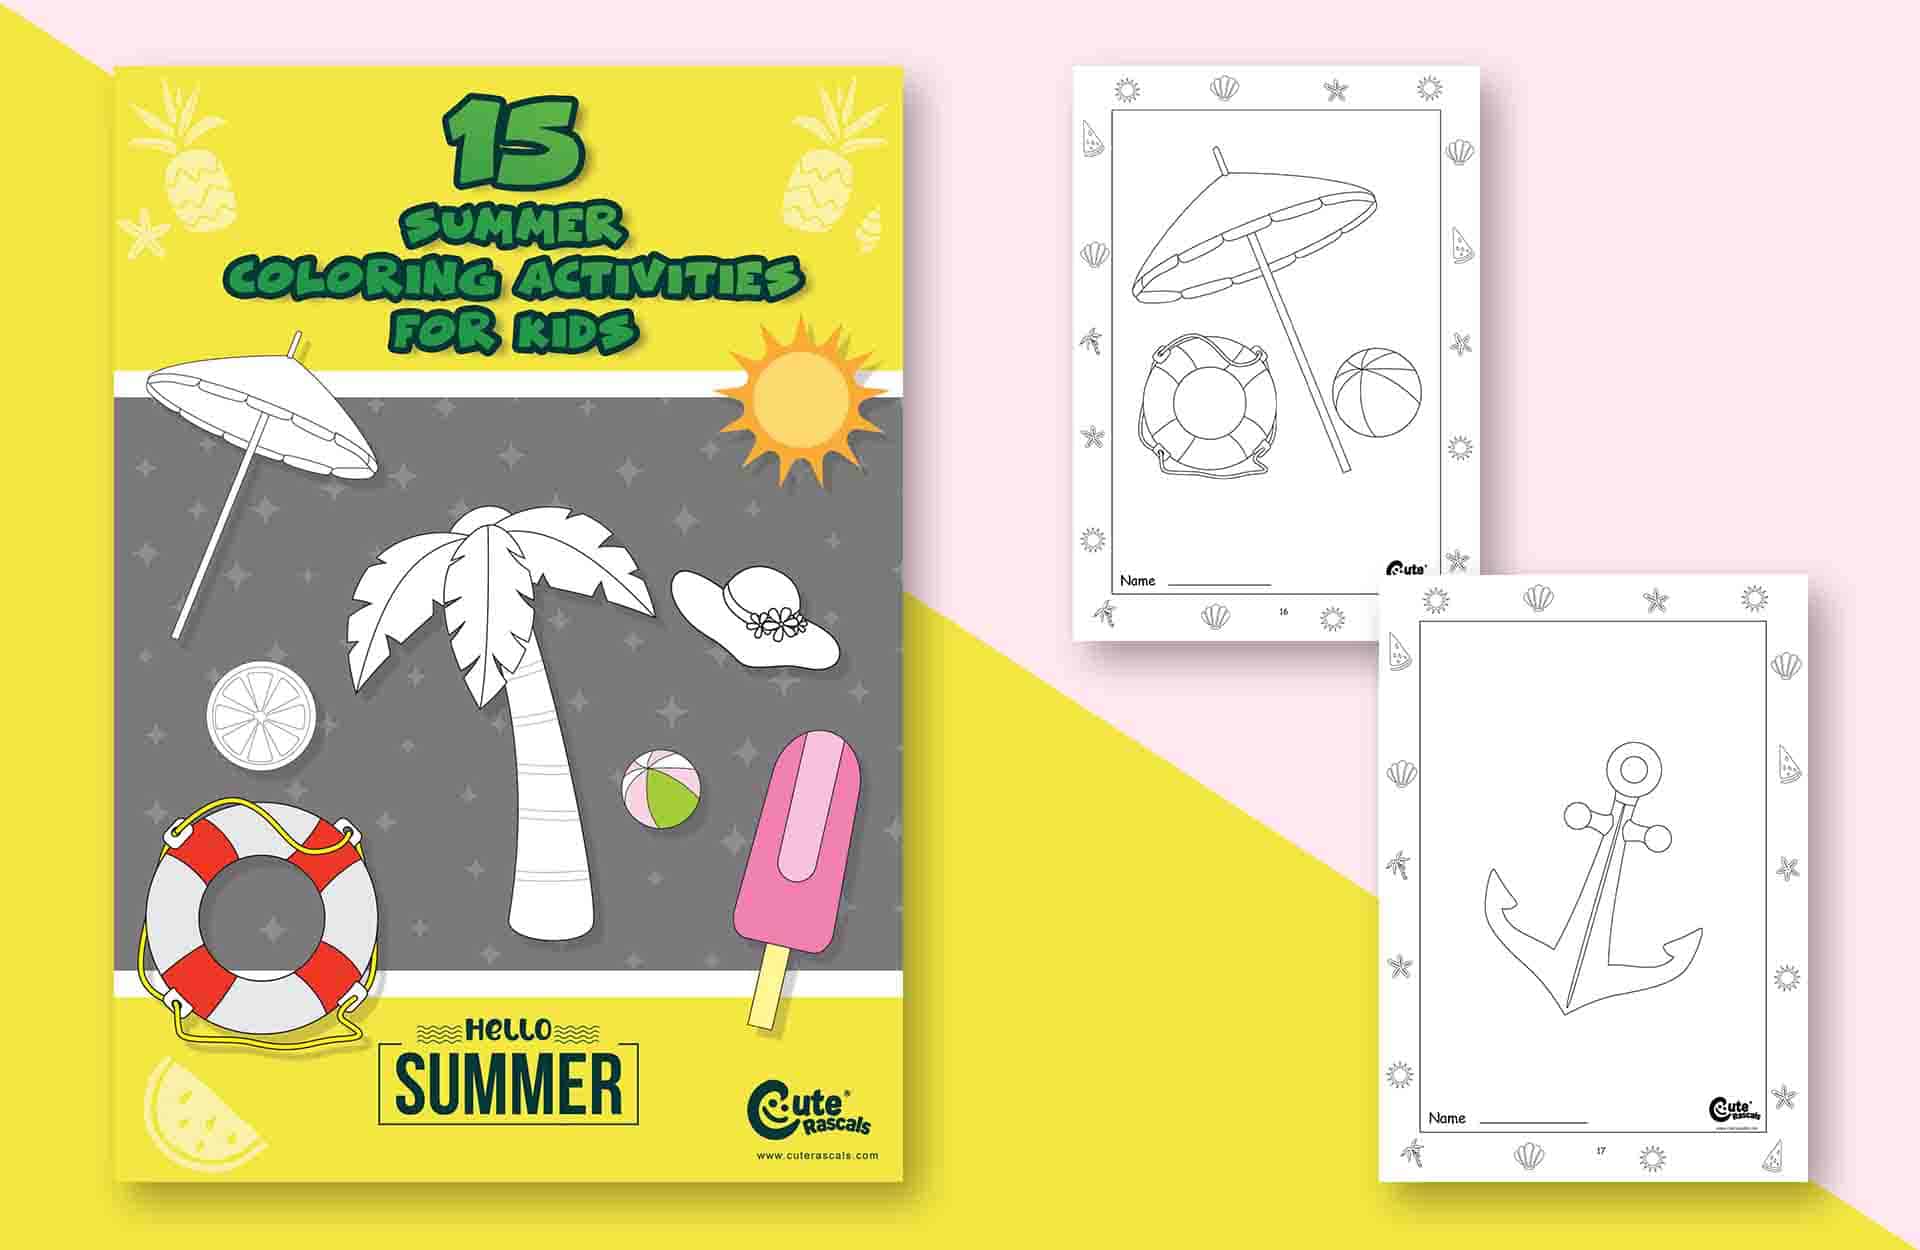 5 Cool Summer Coloring Pages For Kids' Fun Time